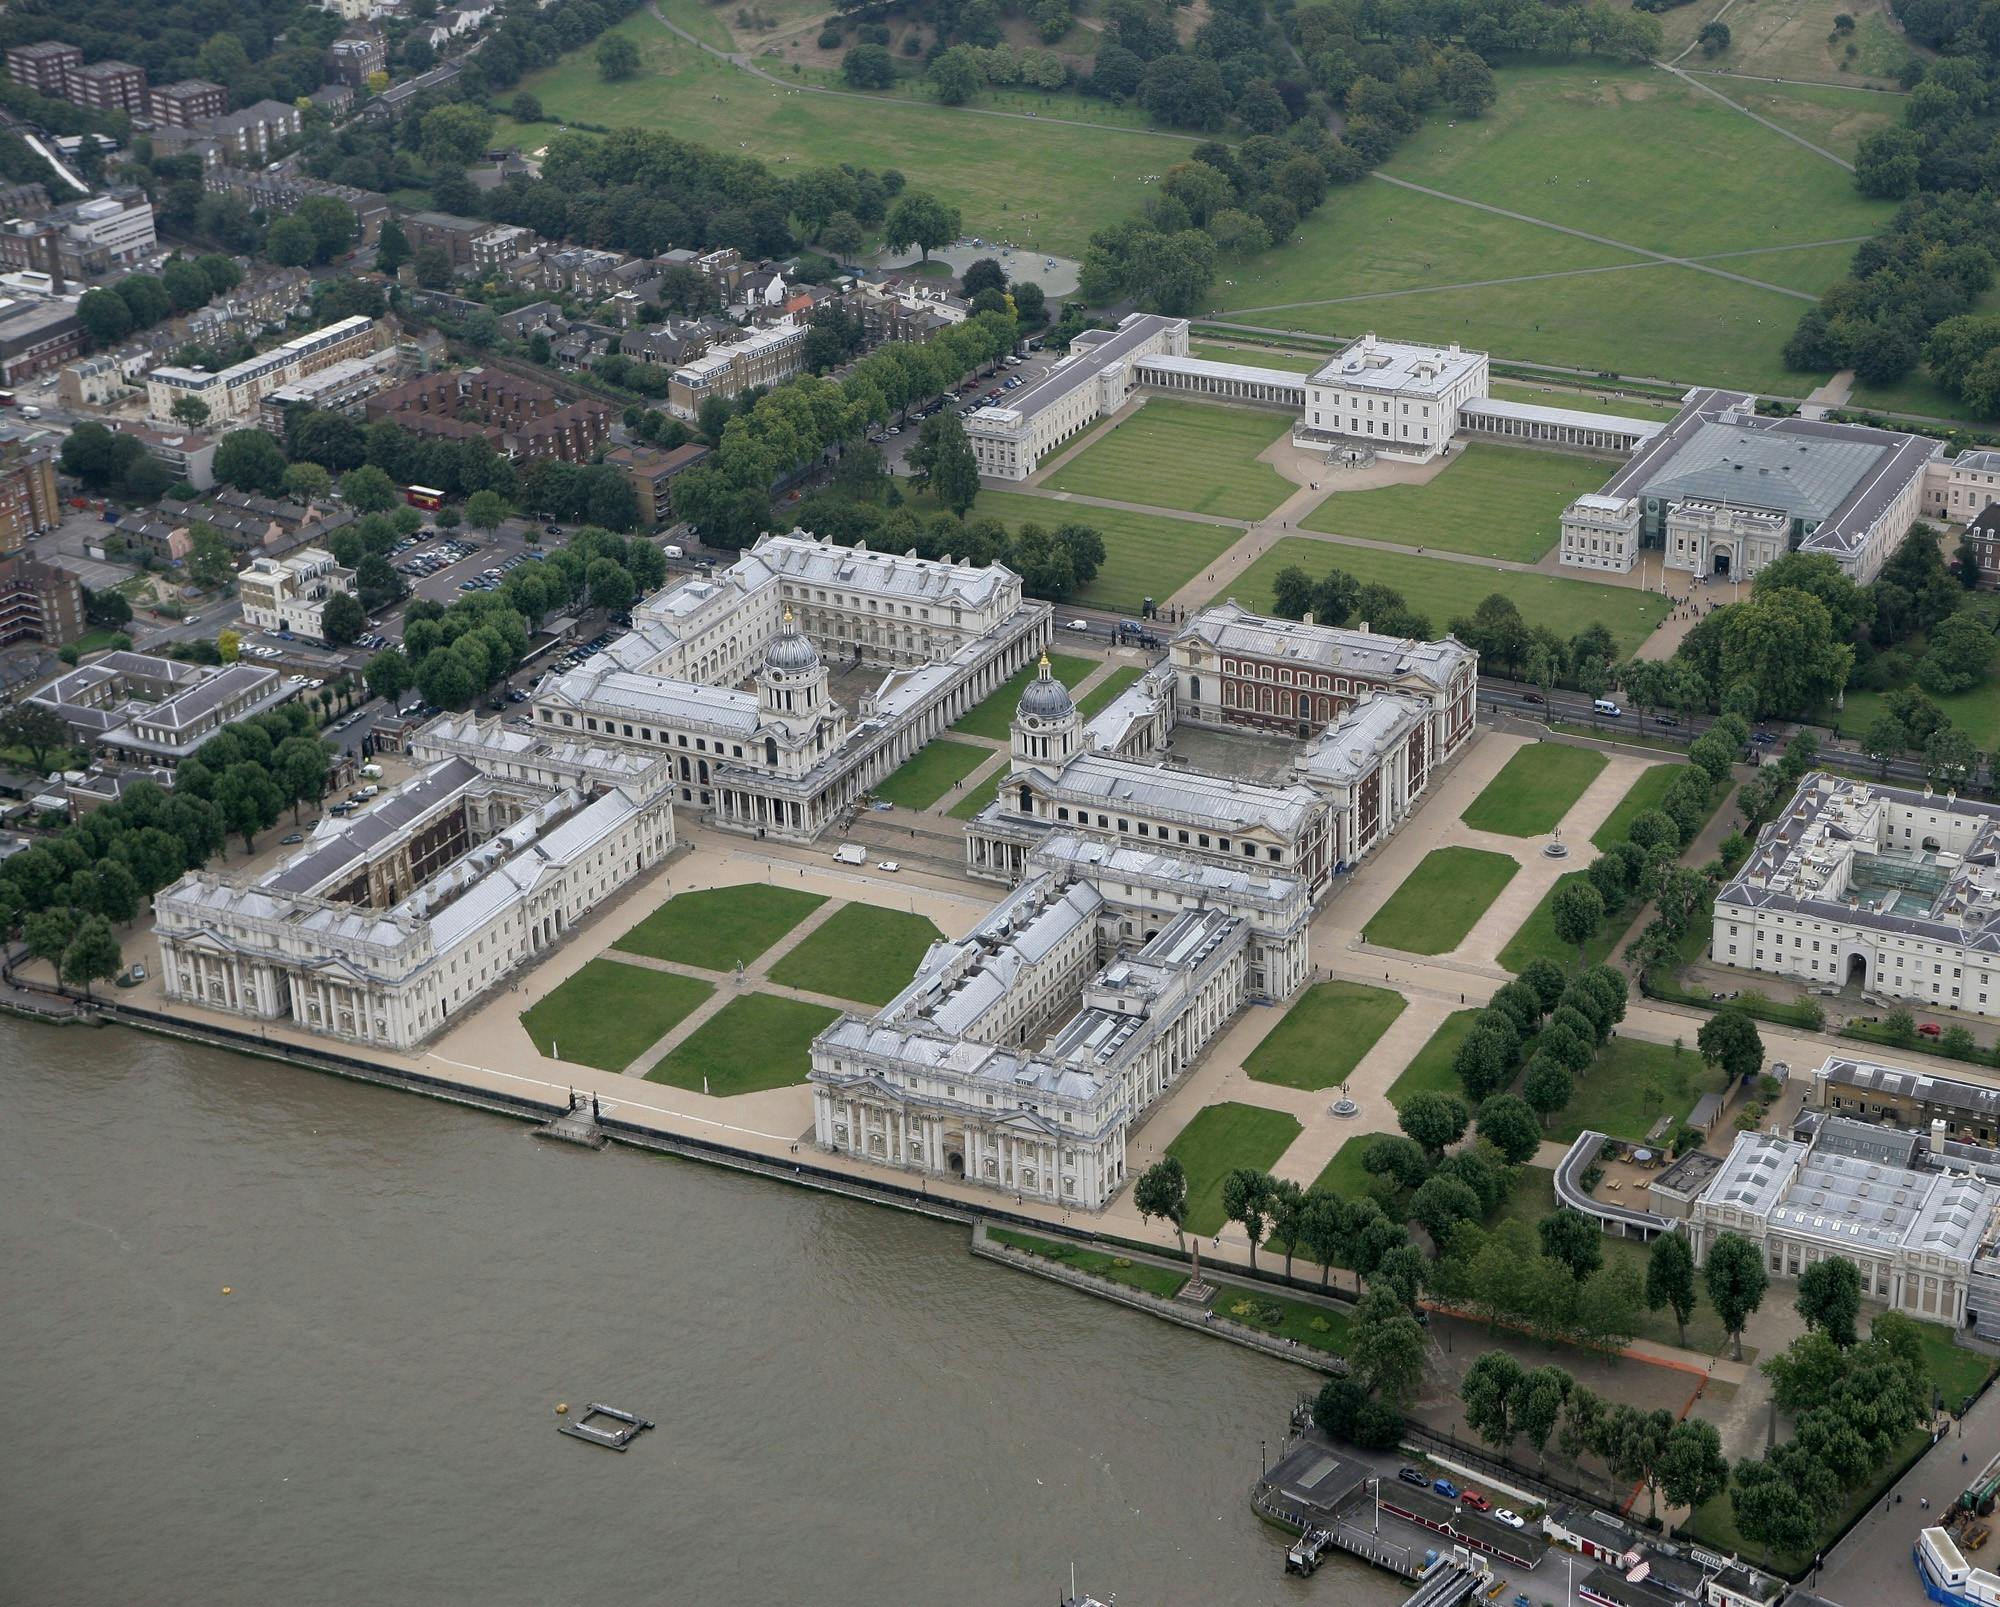 Film and TV Locations walking tour at the Old Royal Naval College Musement